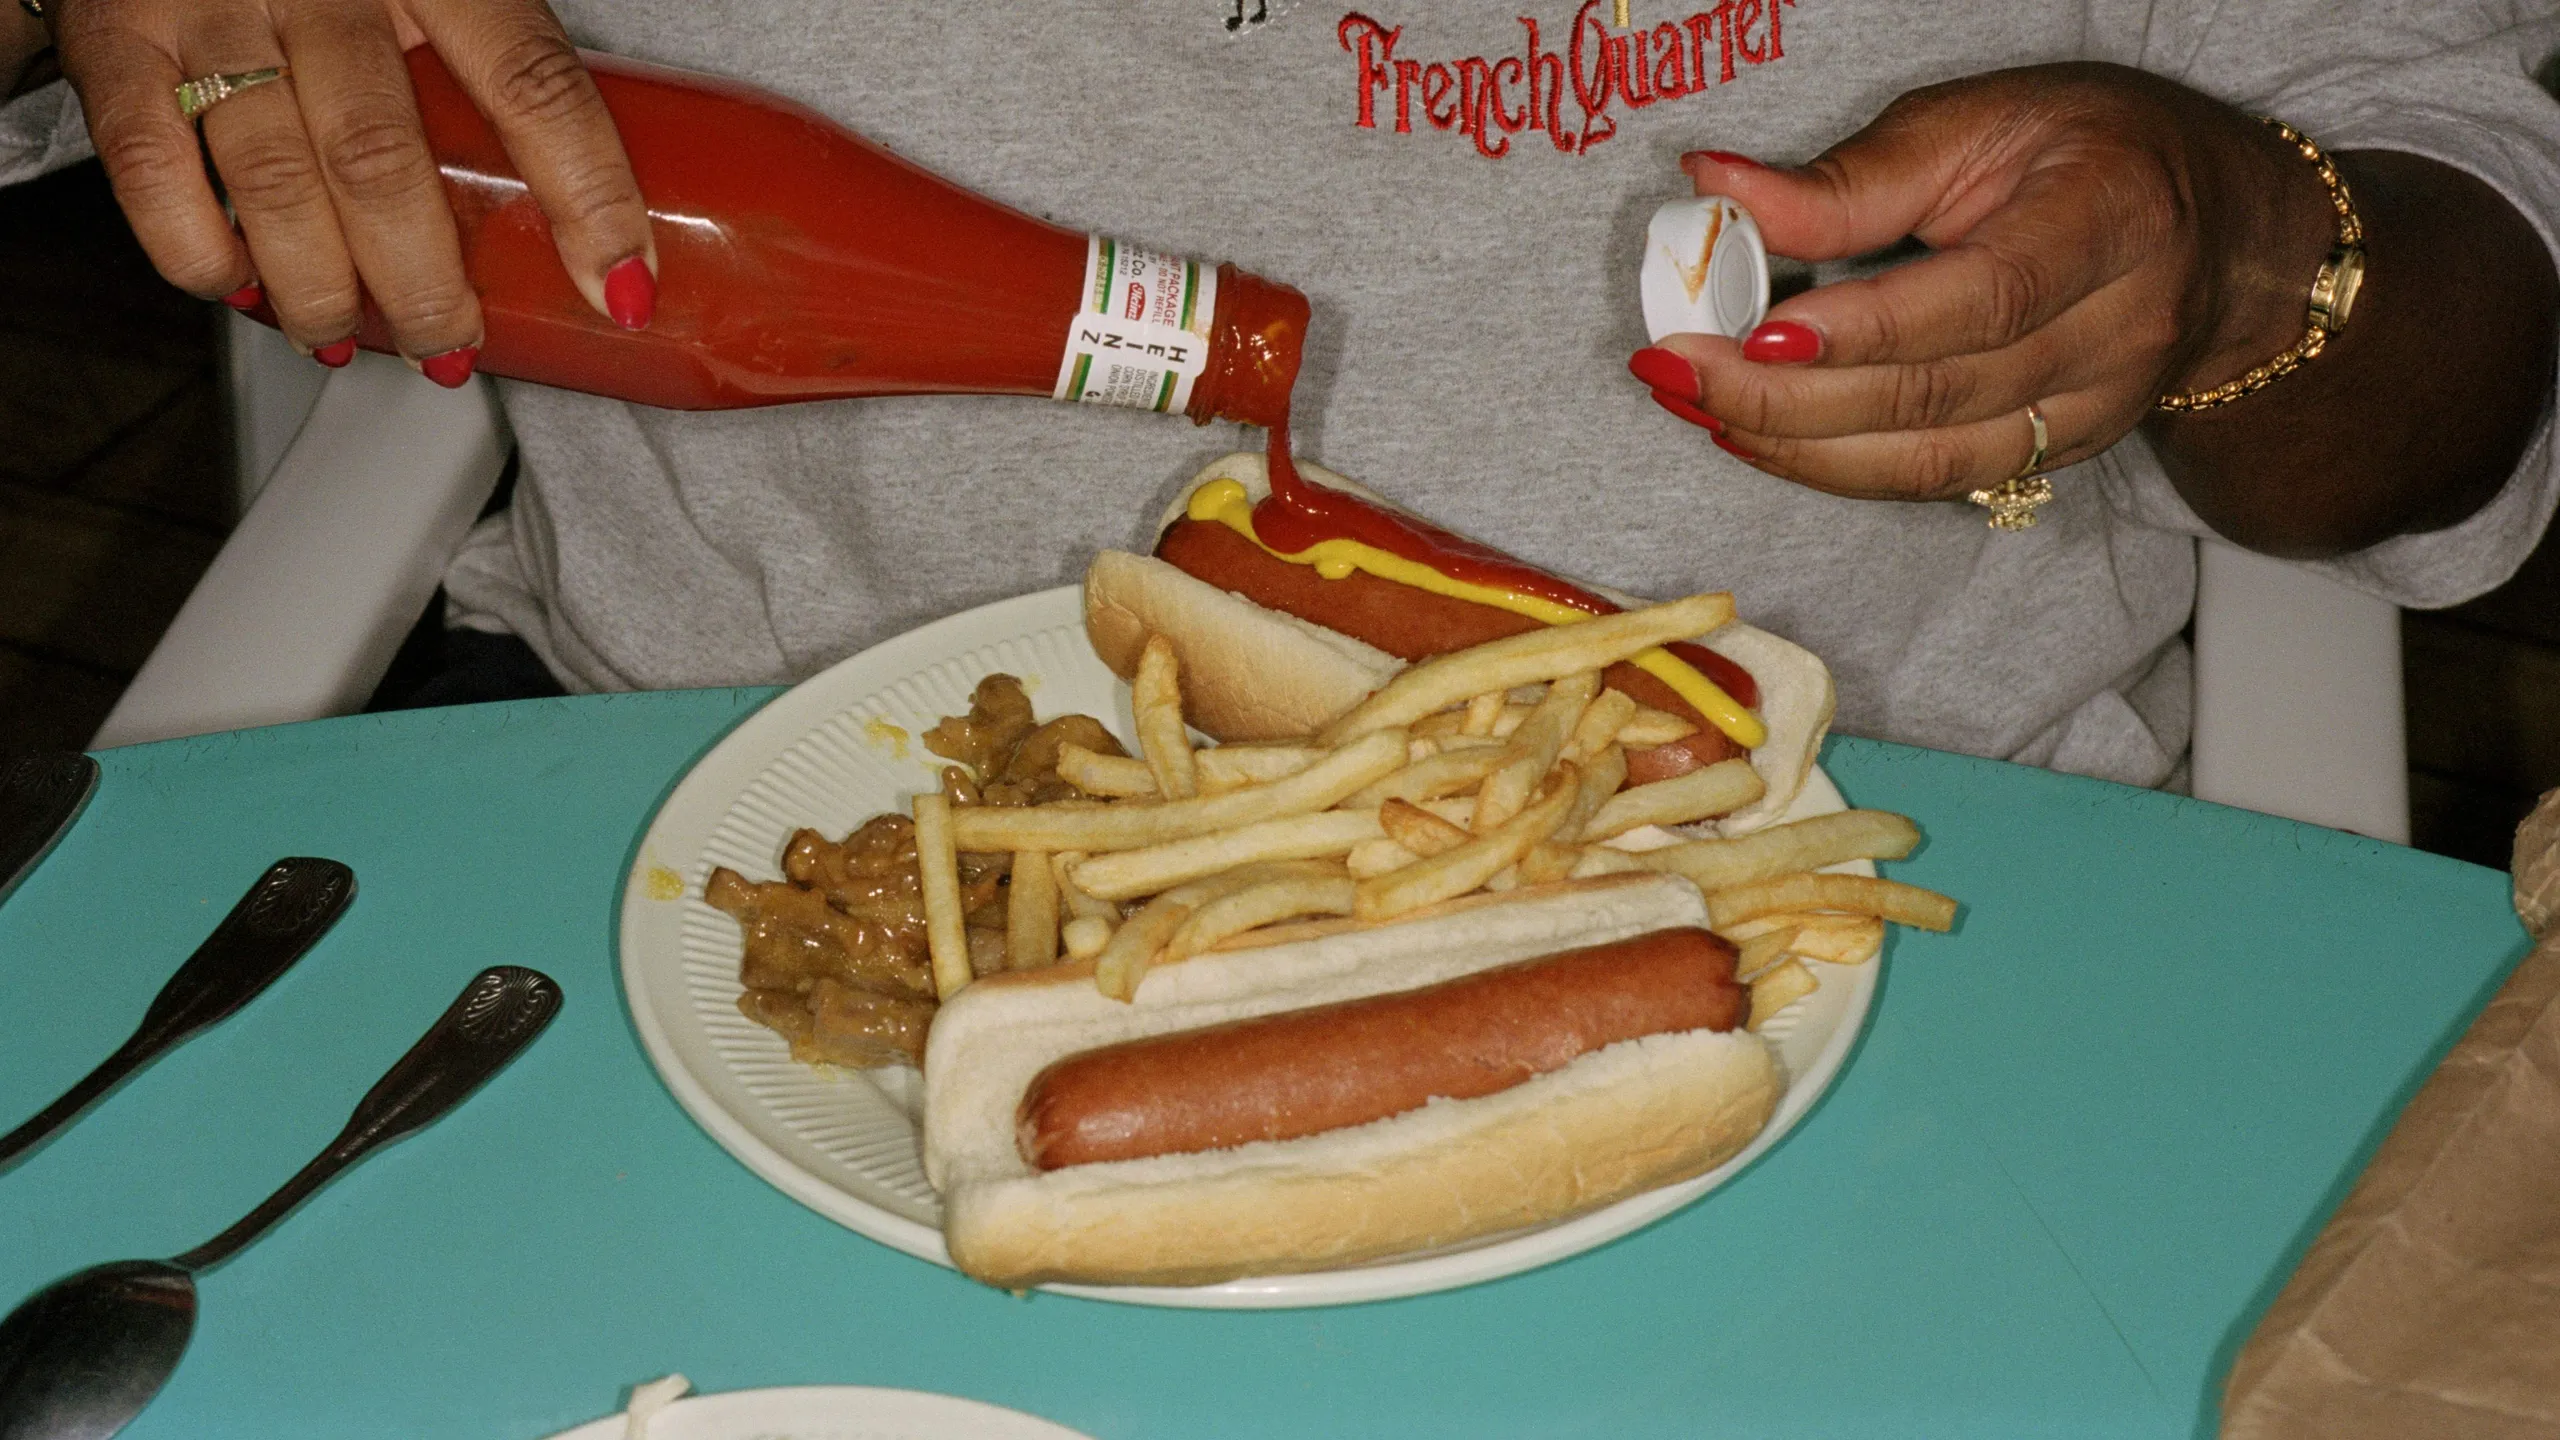 Heinz's Bold Challenge to Chicago's Hot Dog Tradition: A Ketchup Revolution?